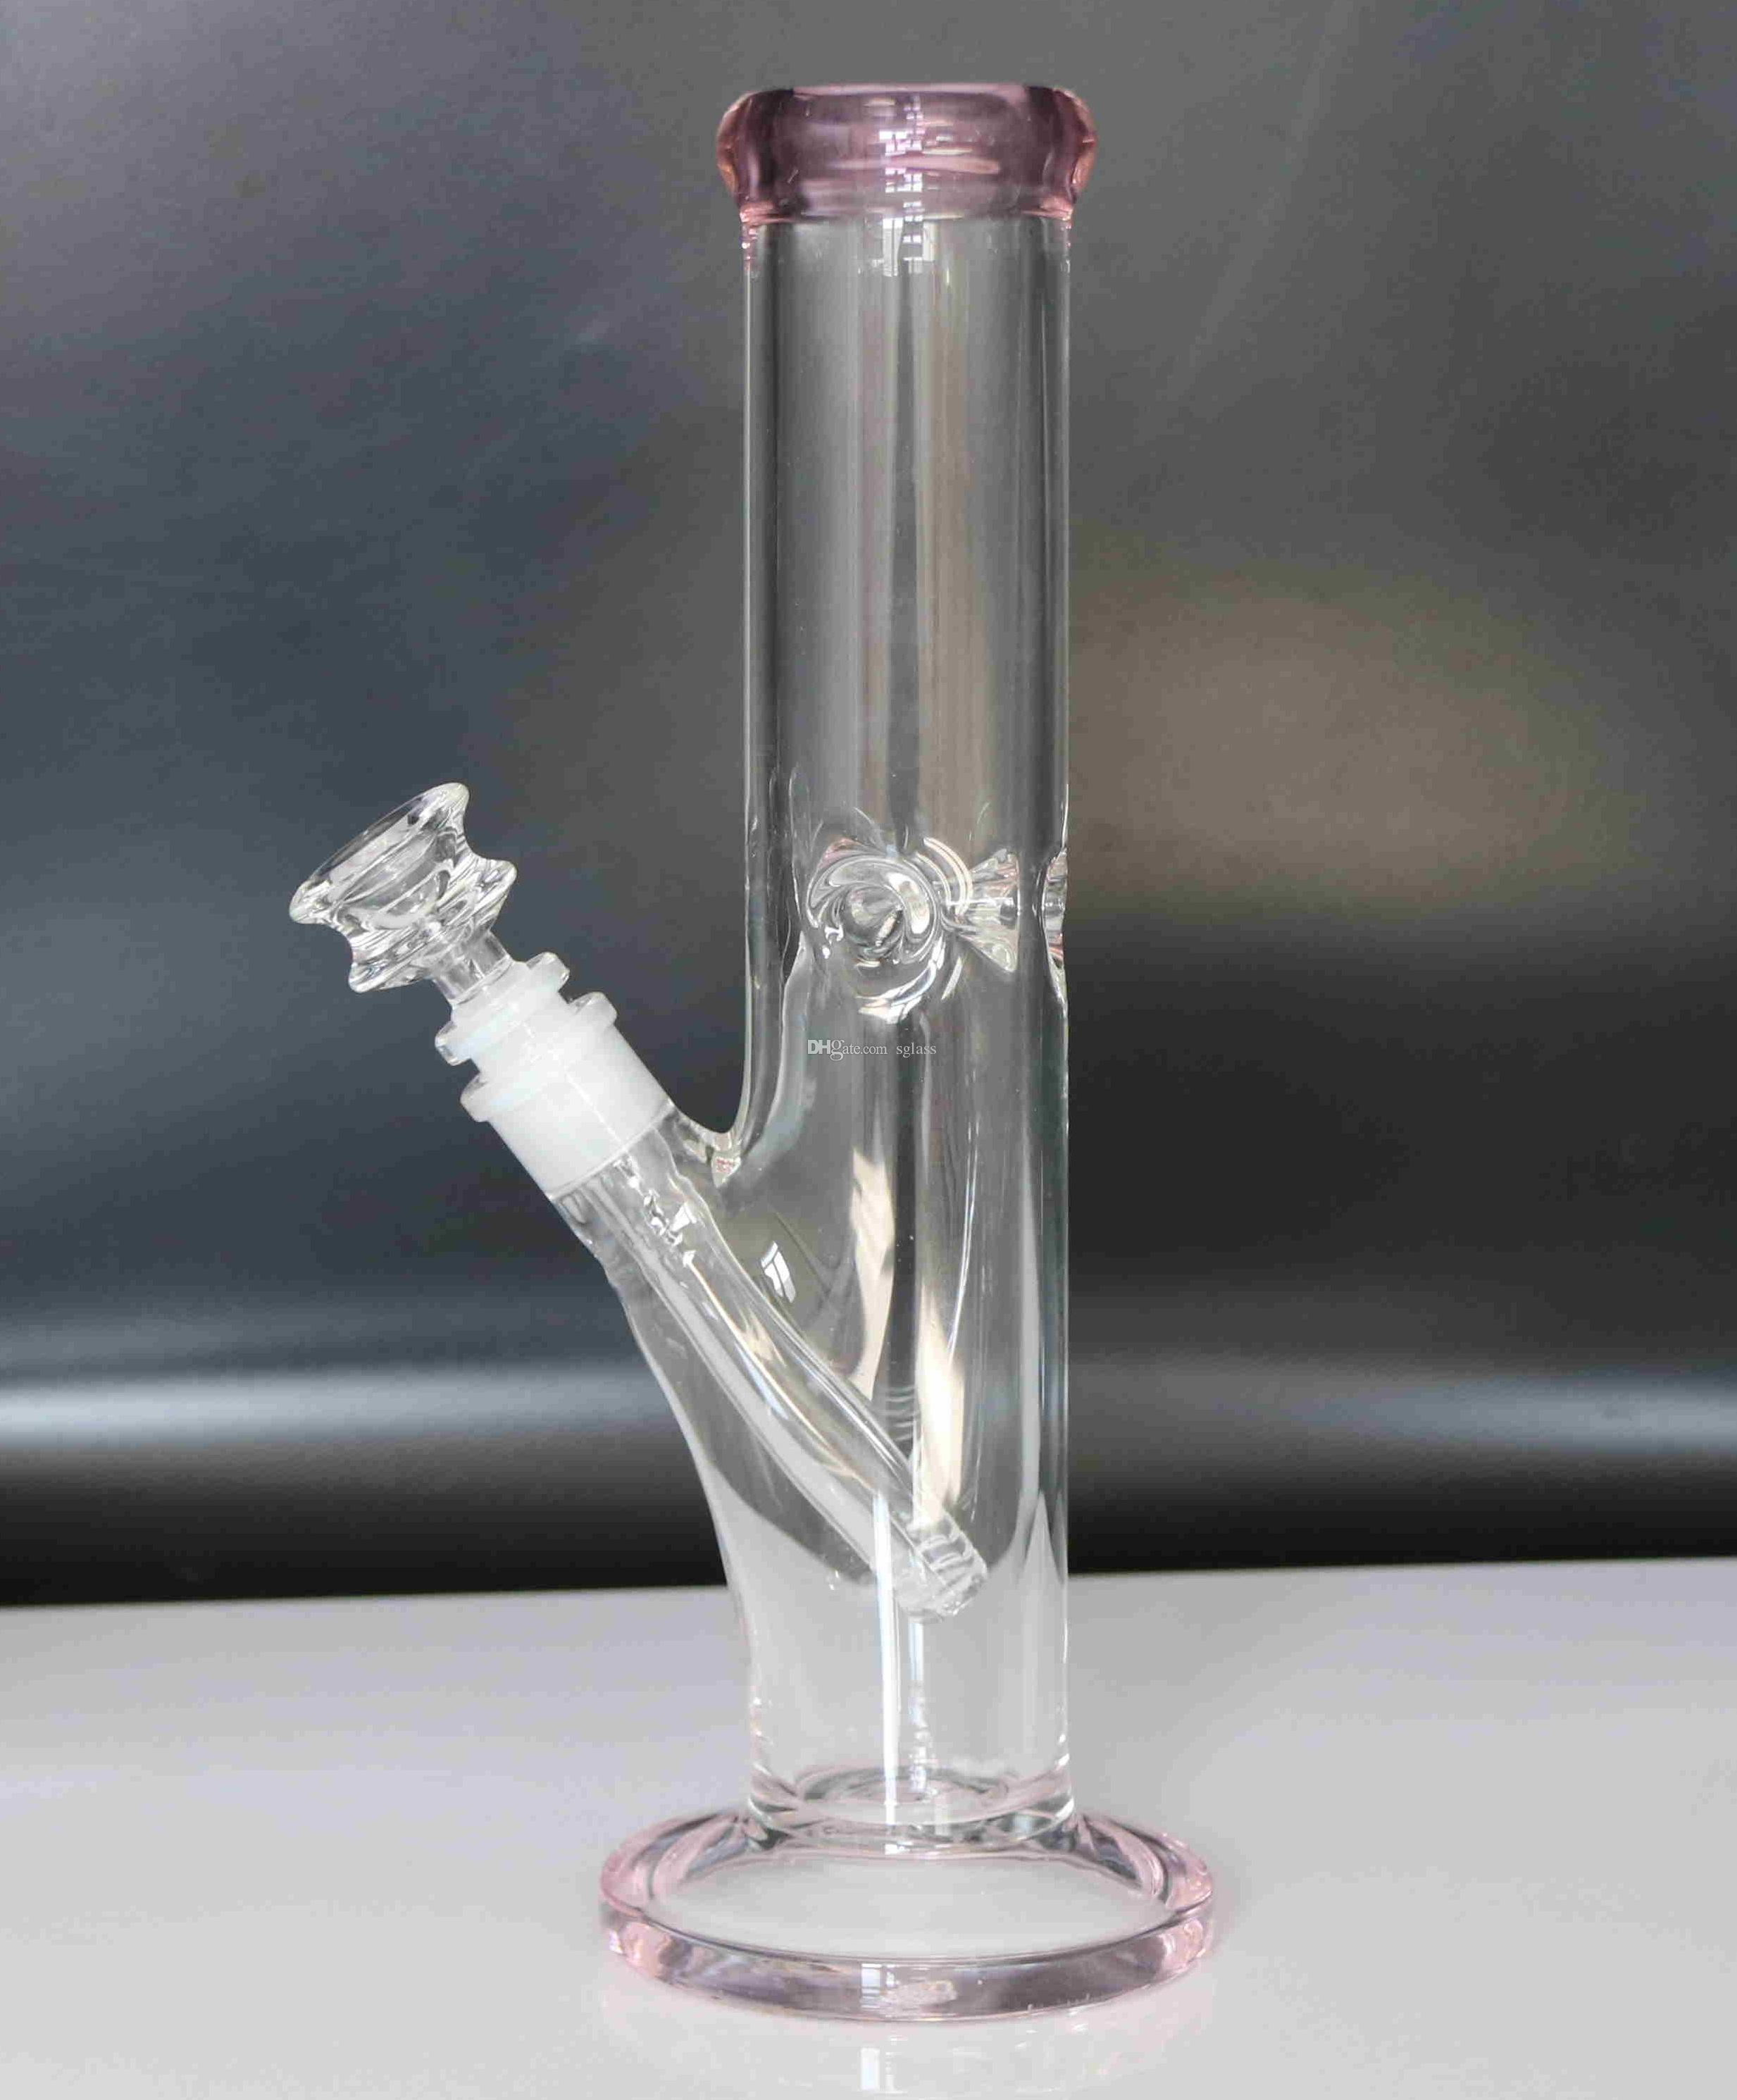 13 Spectacular 12 Inch Glass Cylinder Vase 2024 free download 12 inch glass cylinder vase of 2018 7 mm thick glass bong 12 inch 18 mm joint thick and heacy for 2018 7 mm thick glass bong 12 inch 18 mm joint thick and heacy glass bong foam packing with 